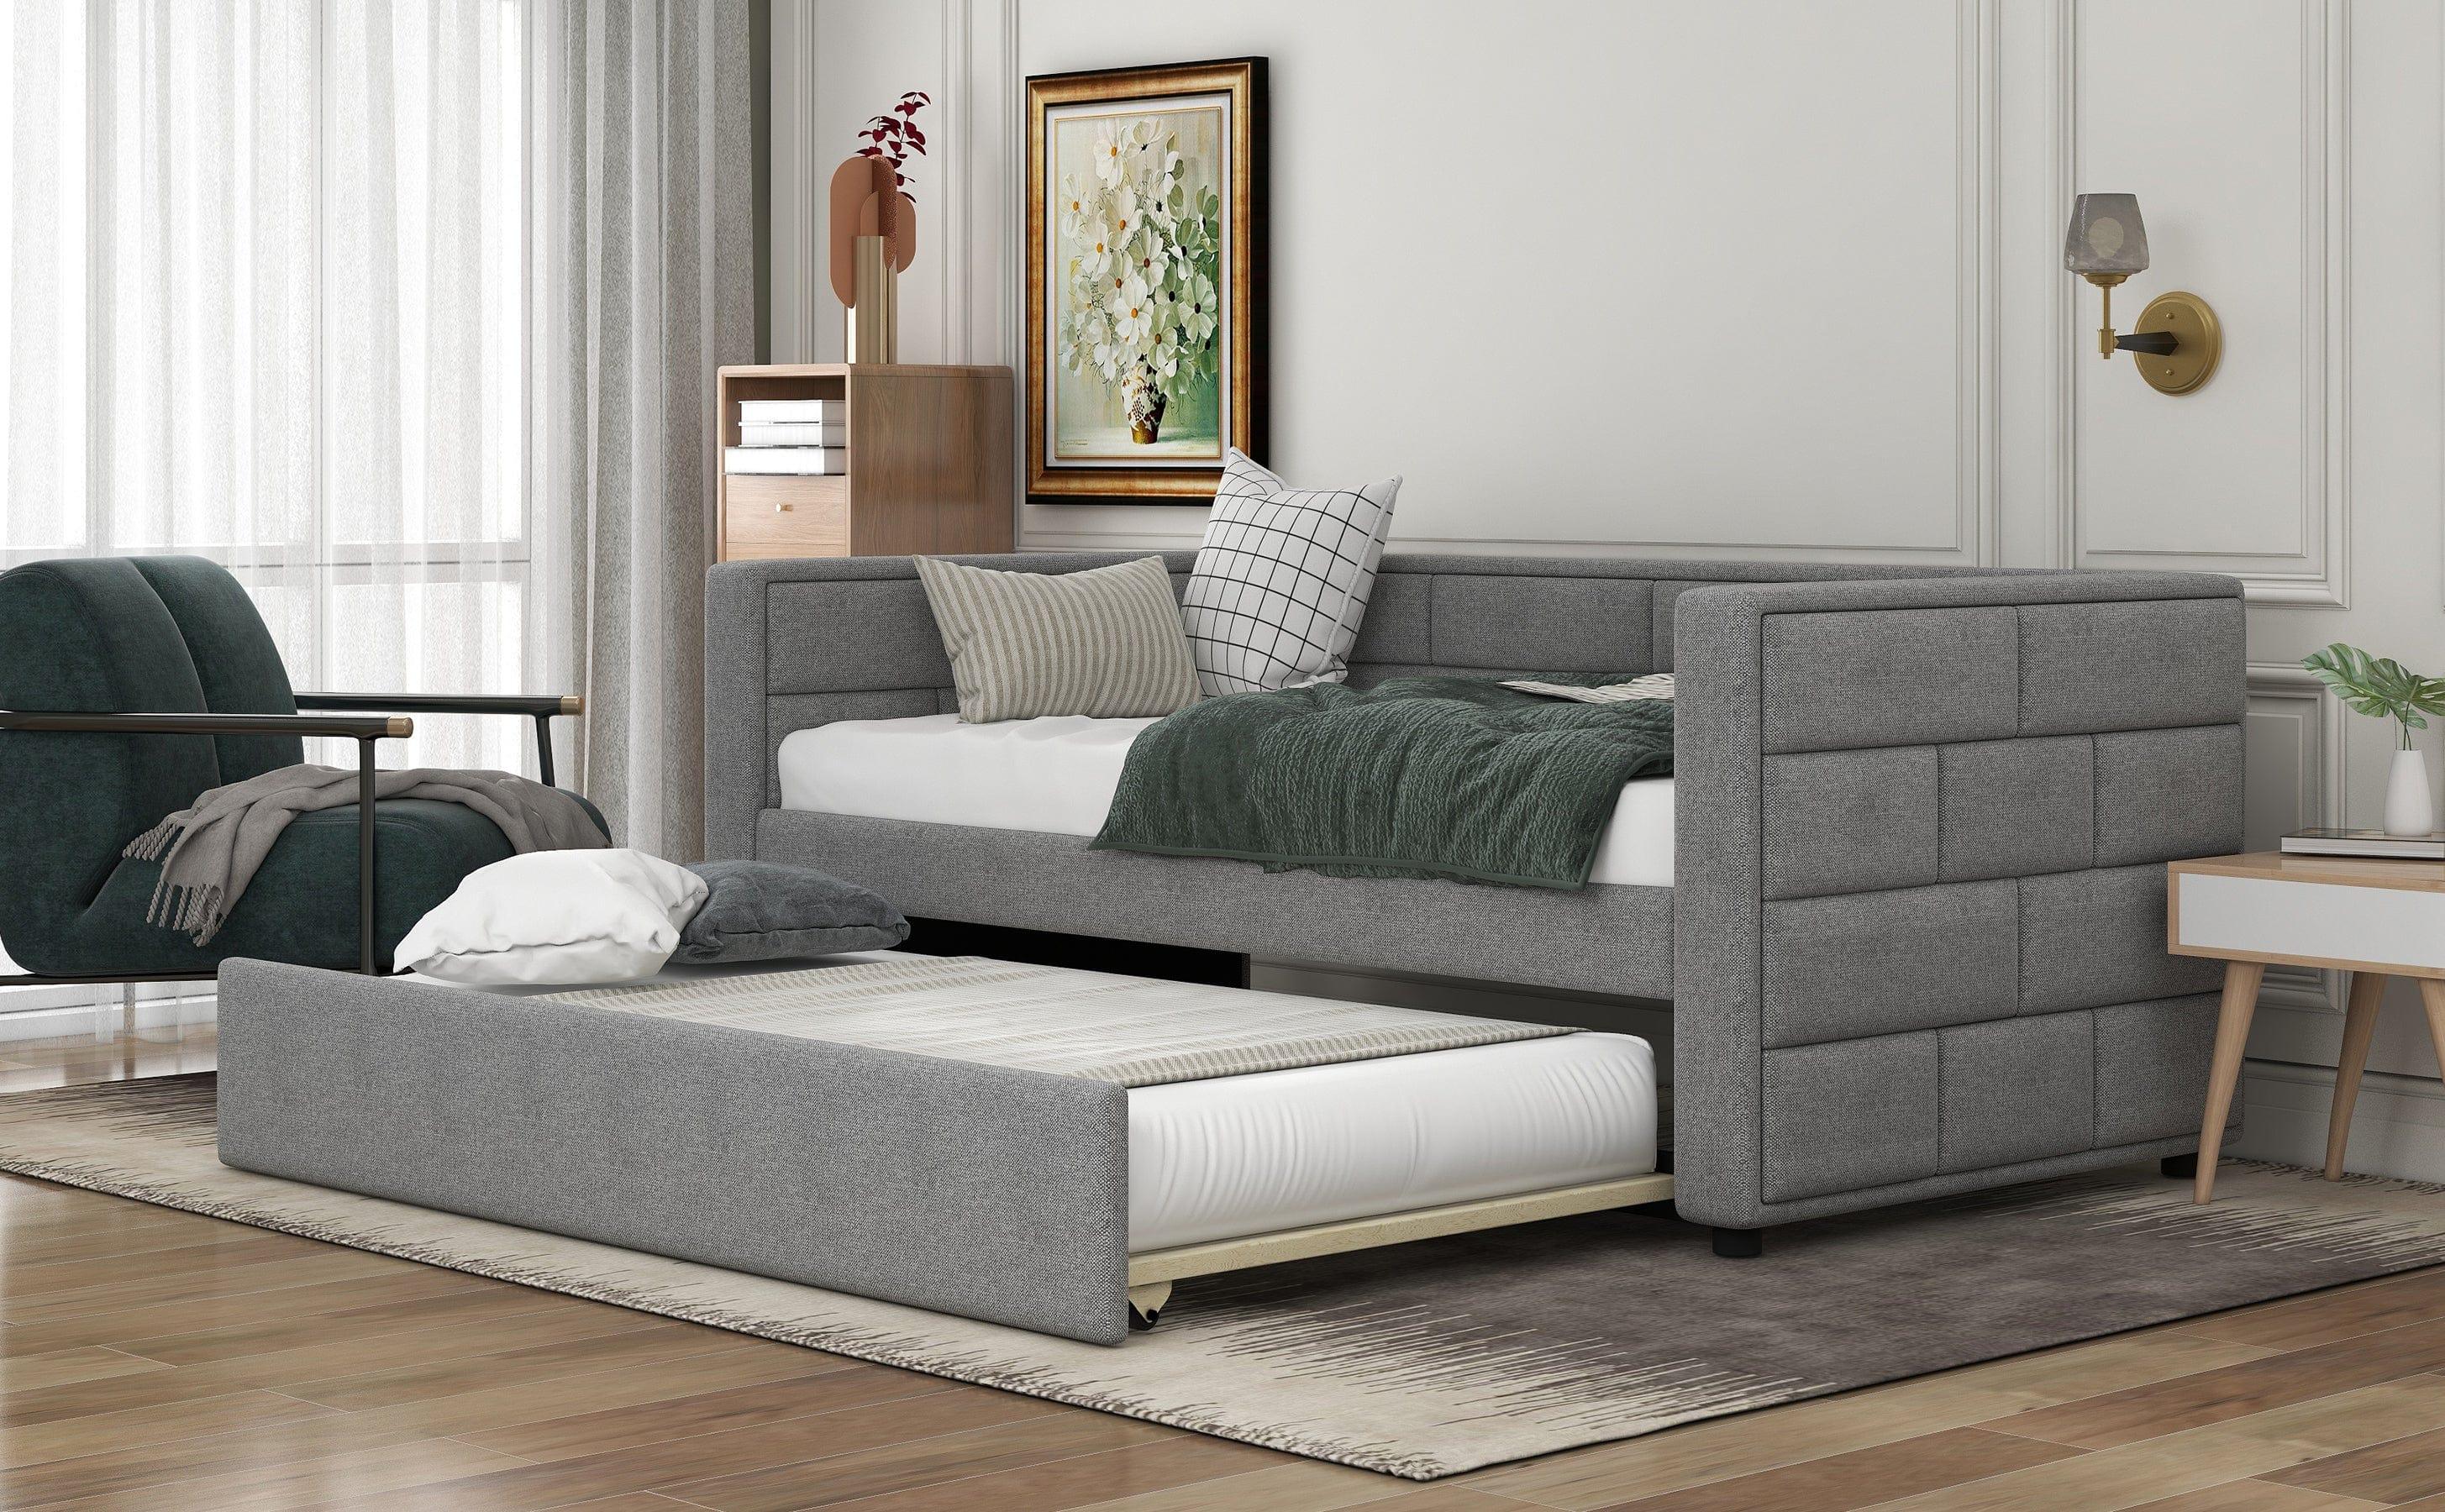 Shop Twin Size Daybed with Trundle, Upholstered Daybed with Padded Back, Gray Mademoiselle Home Decor